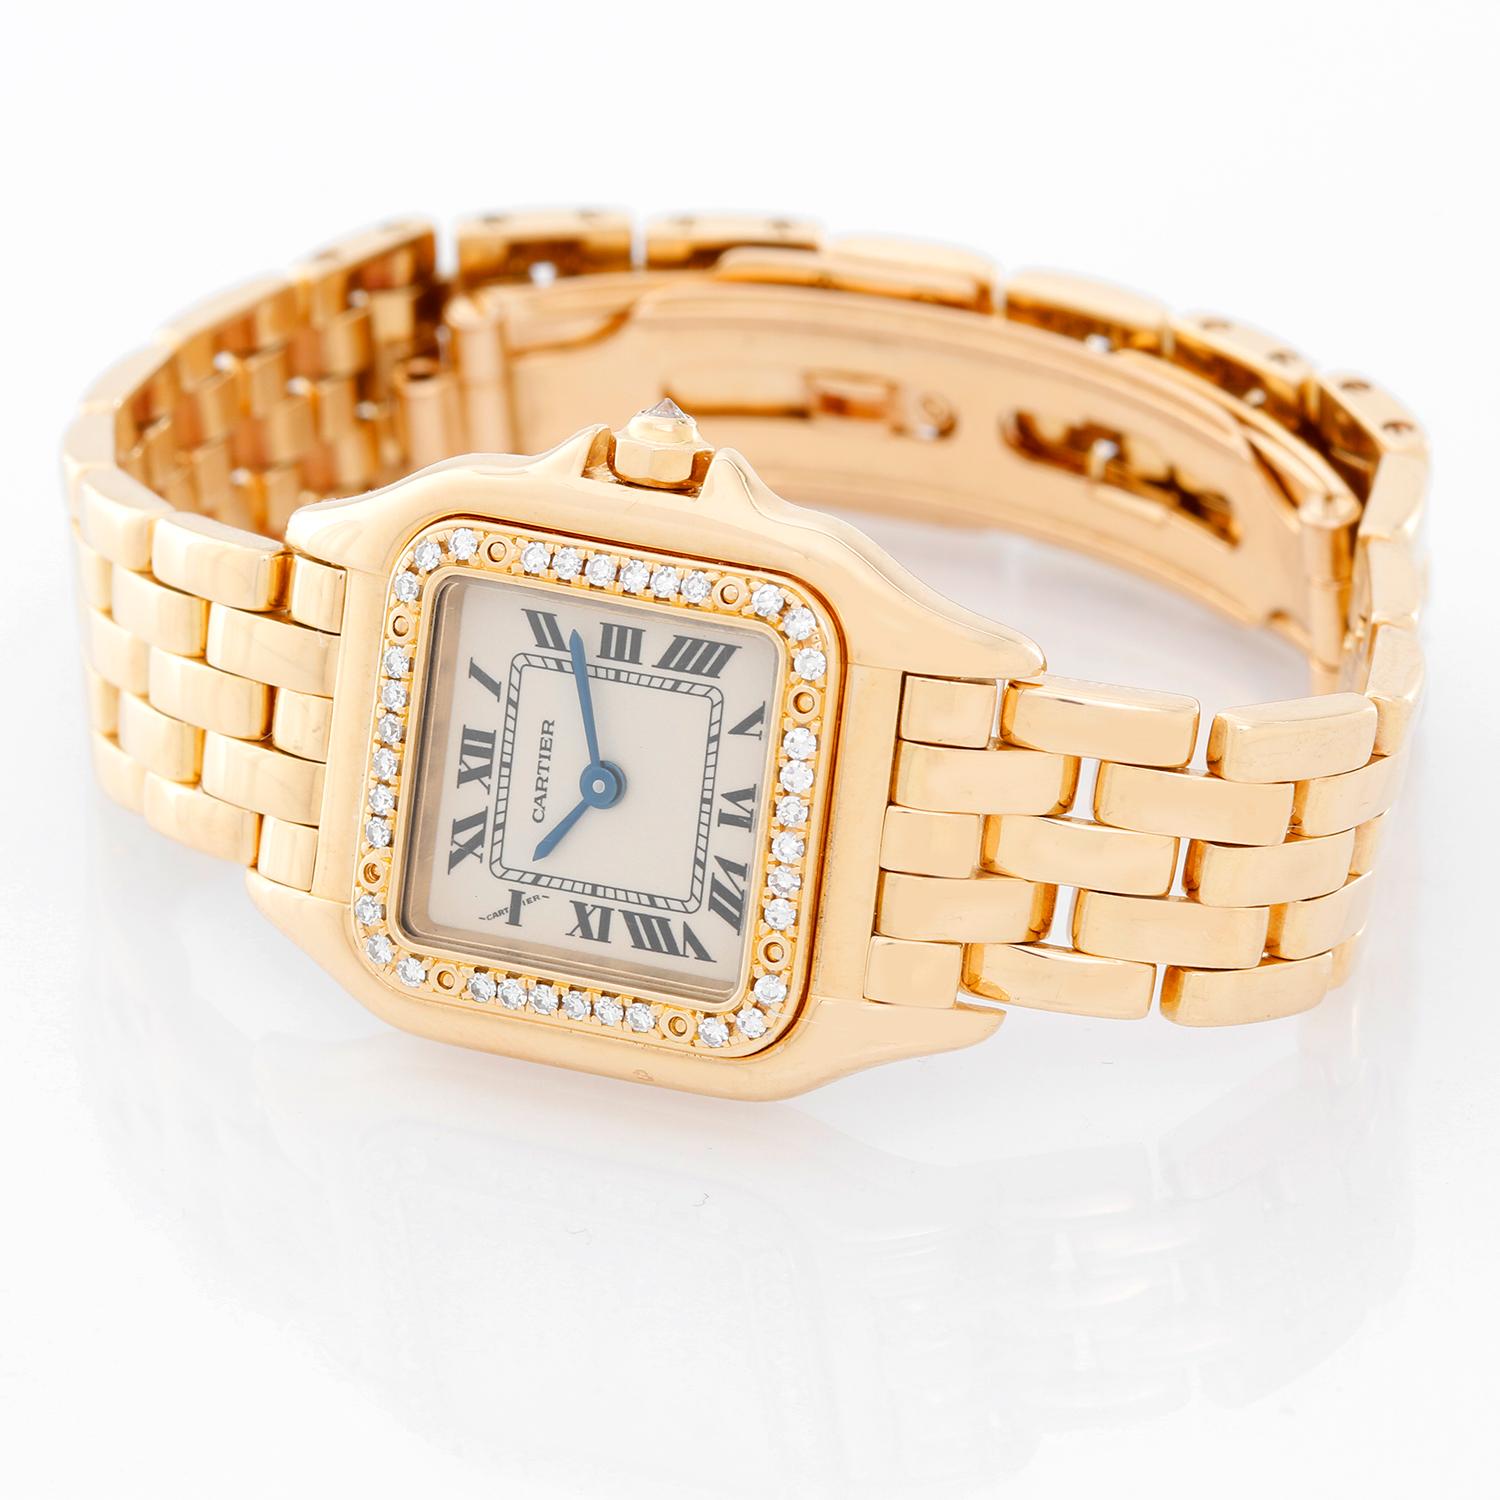 Cartier Panther Ladies 18k Yellow Gold Diamond Watch - Quartz. 18k yellow gold case with factory diamond bezel (21mm x 30mm). Ivory colored dial with black Roman numerals. 18k yellow gold Panther bracelet. Pre-owned with Cartier box and book.